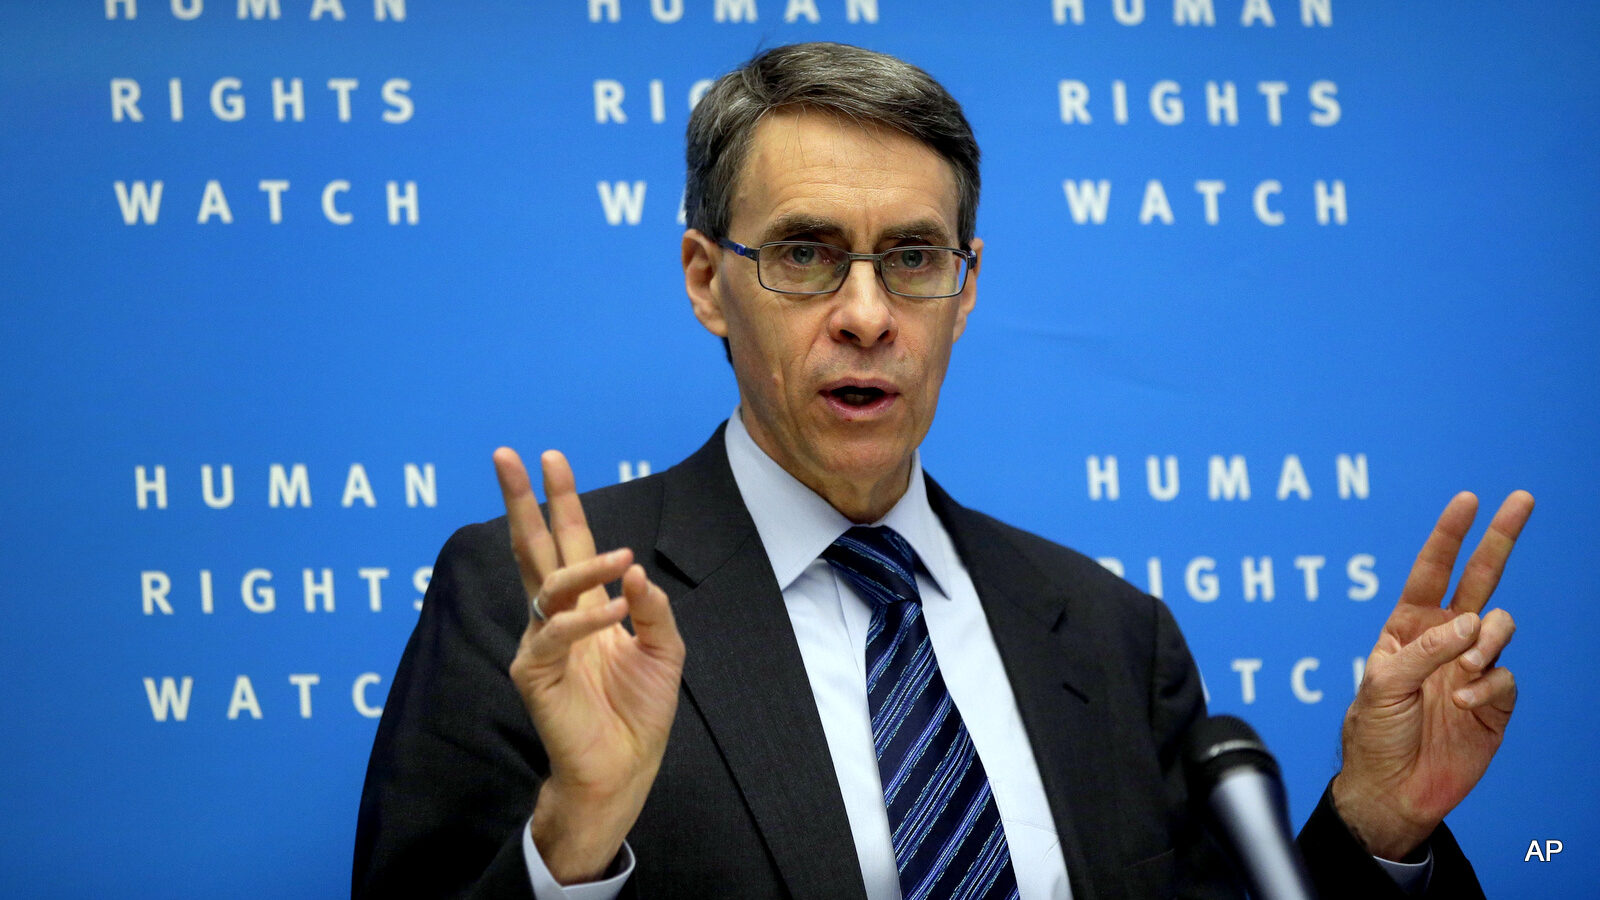 Kenneth Roth, Executive Director of Human Rights Watch, speaks during the annual press conference of the non governmental organization in Berlin, Germany, Tuesday, Jan. 21, 2014.